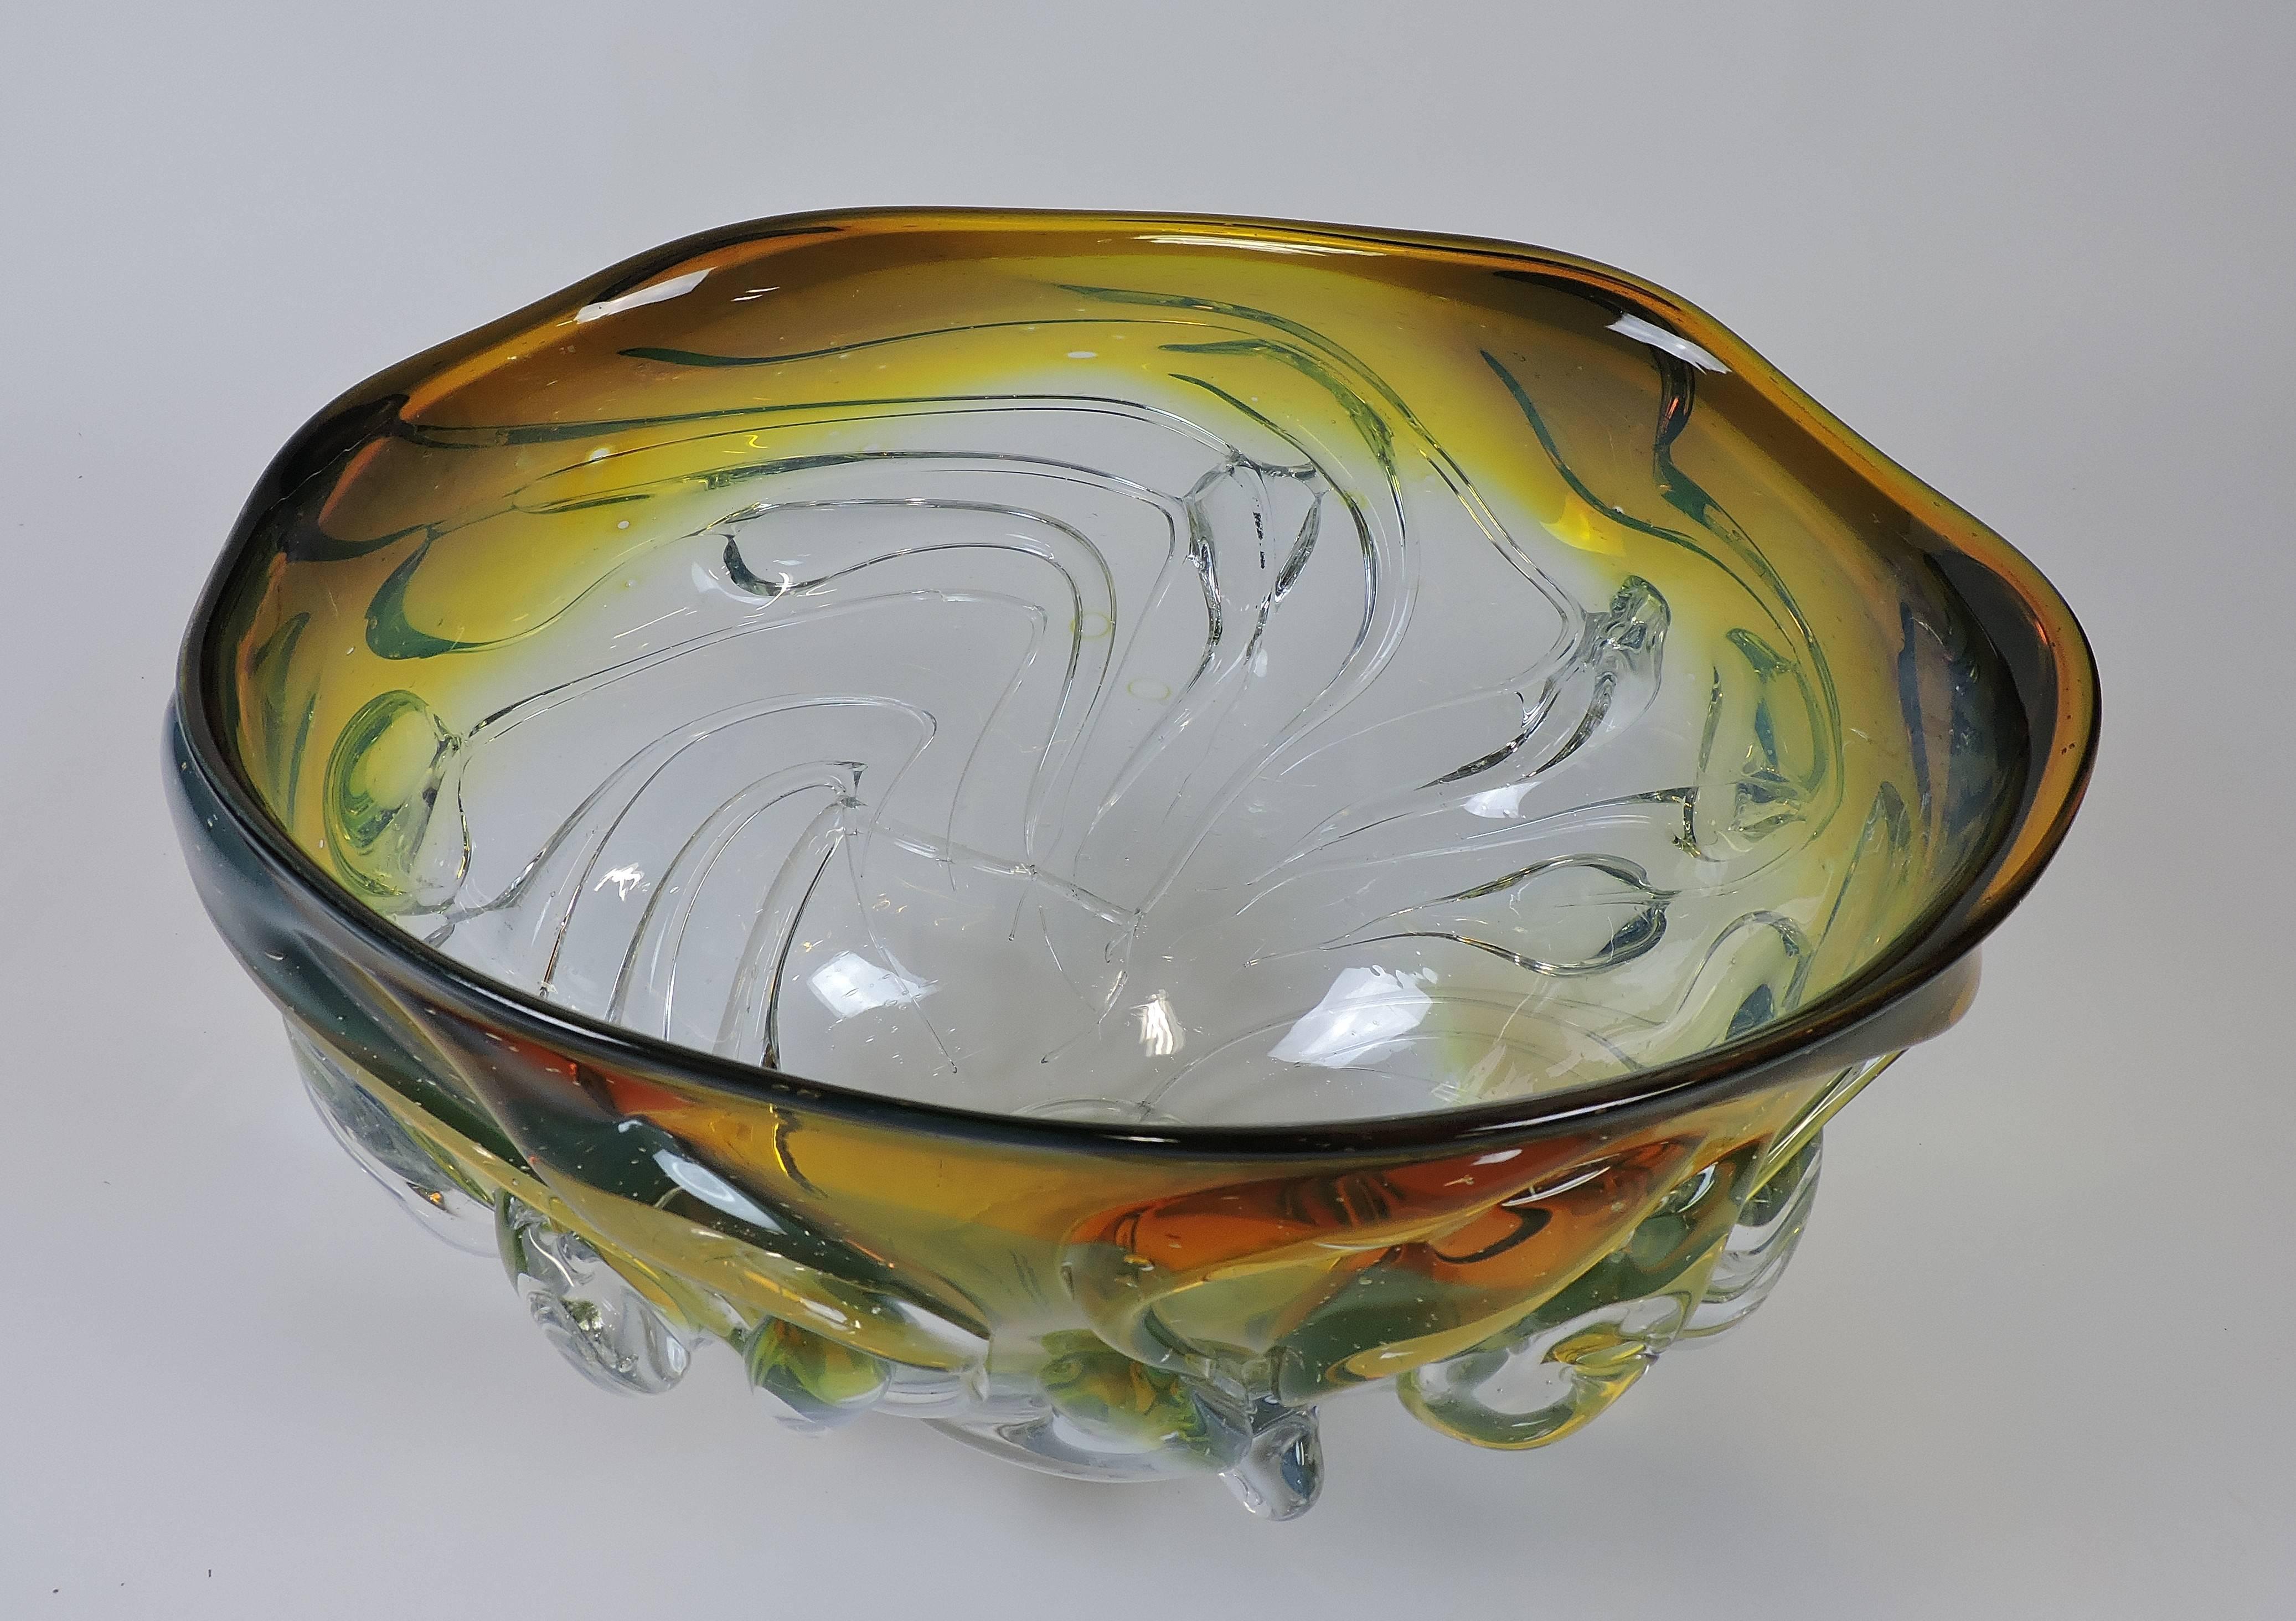 Striking monumental sized drip bowl hand blown by acclaimed glass artist, Will Dexter. This bowl is composed of thick rivulets of glass that give it a dynamic and organic look. Signed Dexter on the bottom. The last picture is to give an idea of